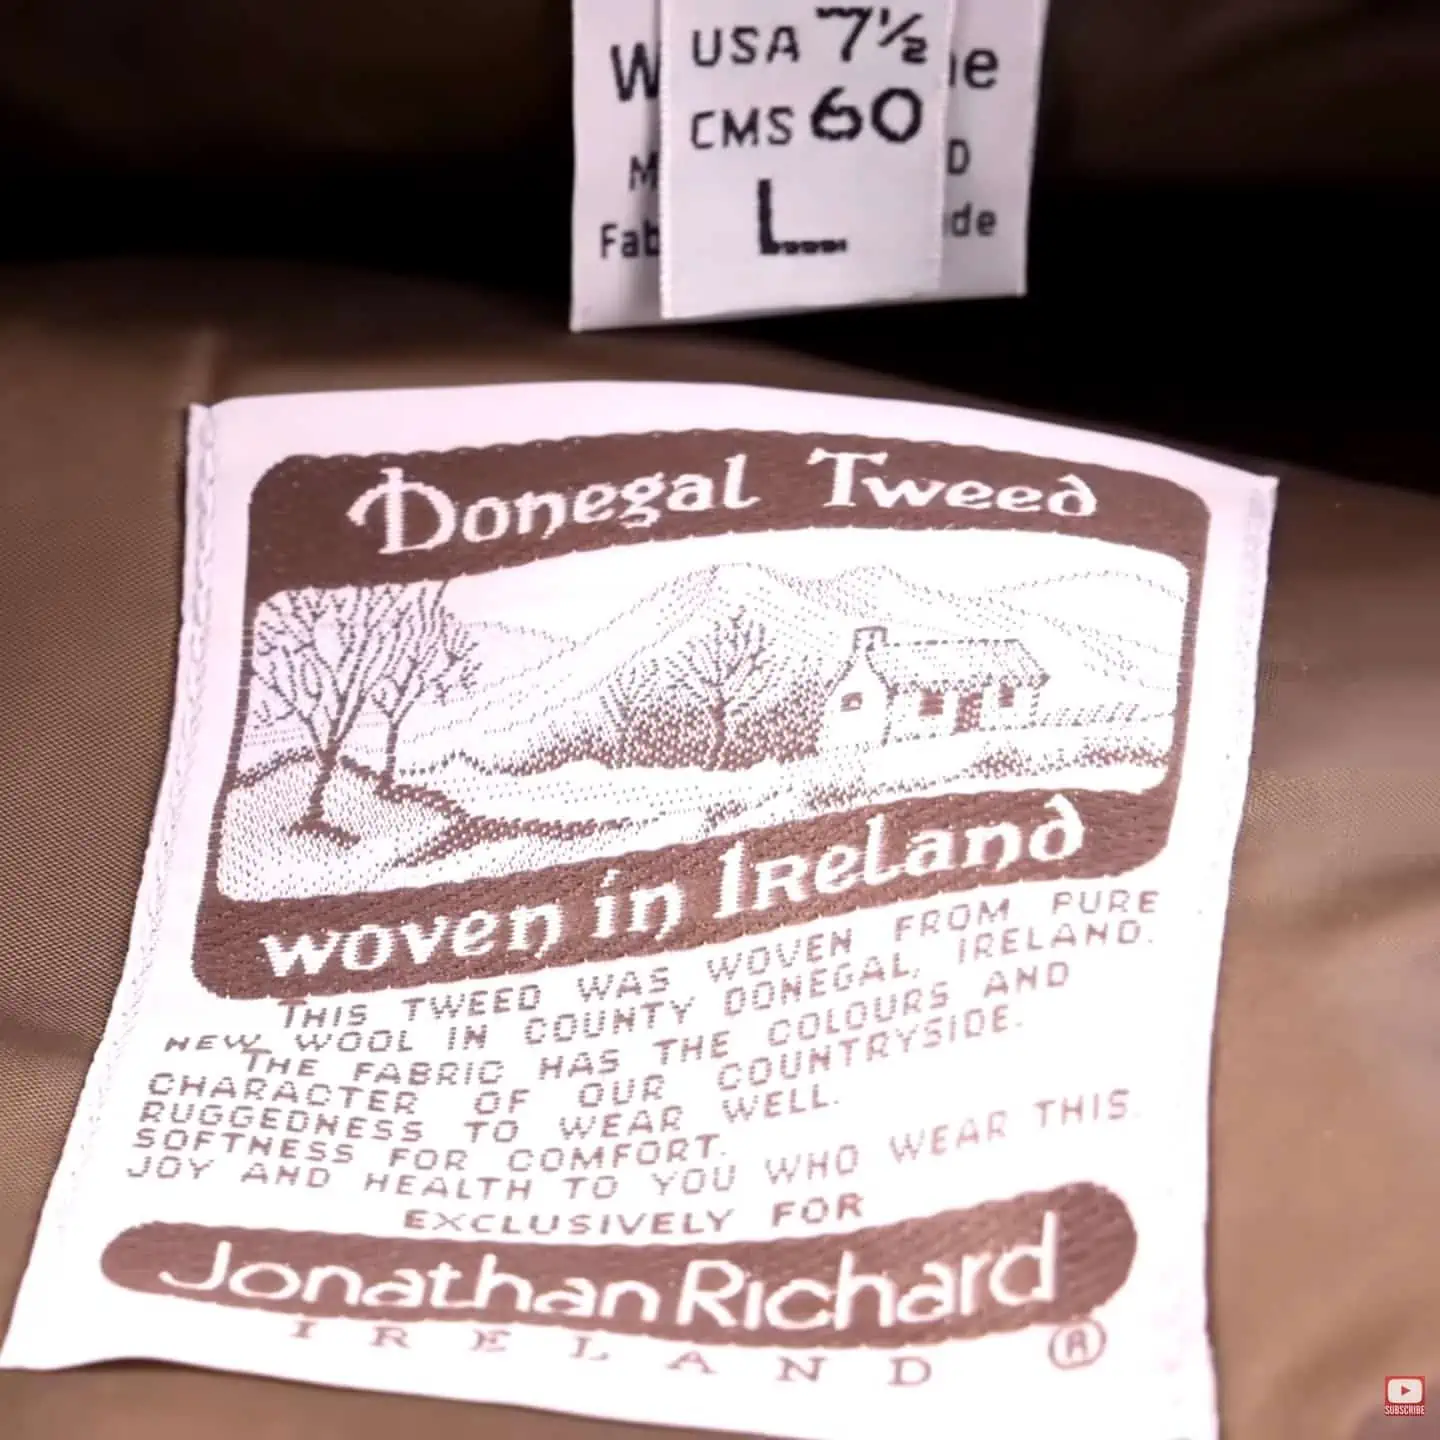 Photo of label of Donegal Tweed flat cap woven in Ireland by Jonathan Richard with size label visible